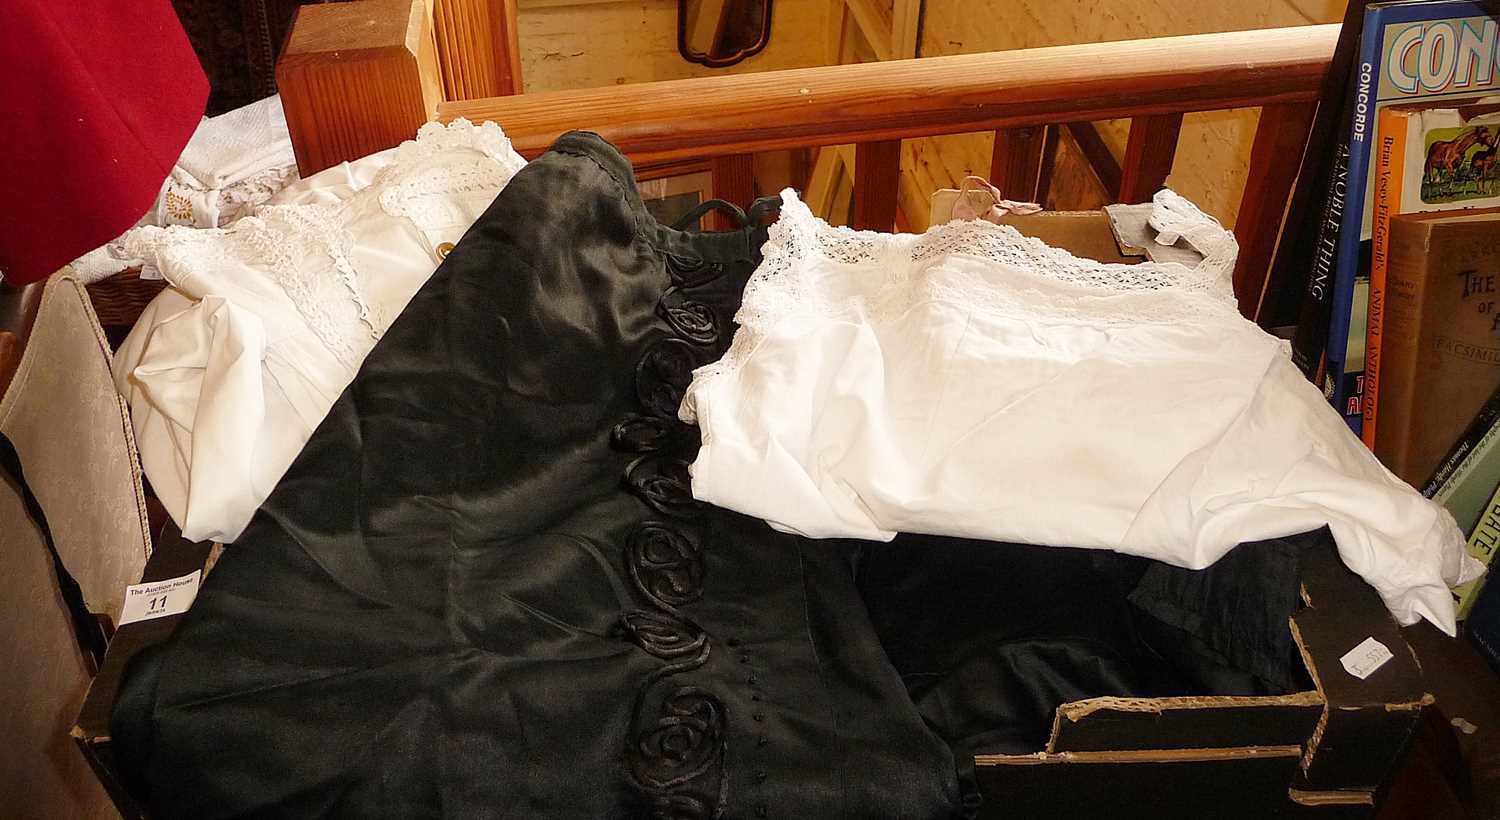 Vintage clothing - assorted Edwardian nightgowns with lacework trimming, long black silk skirts